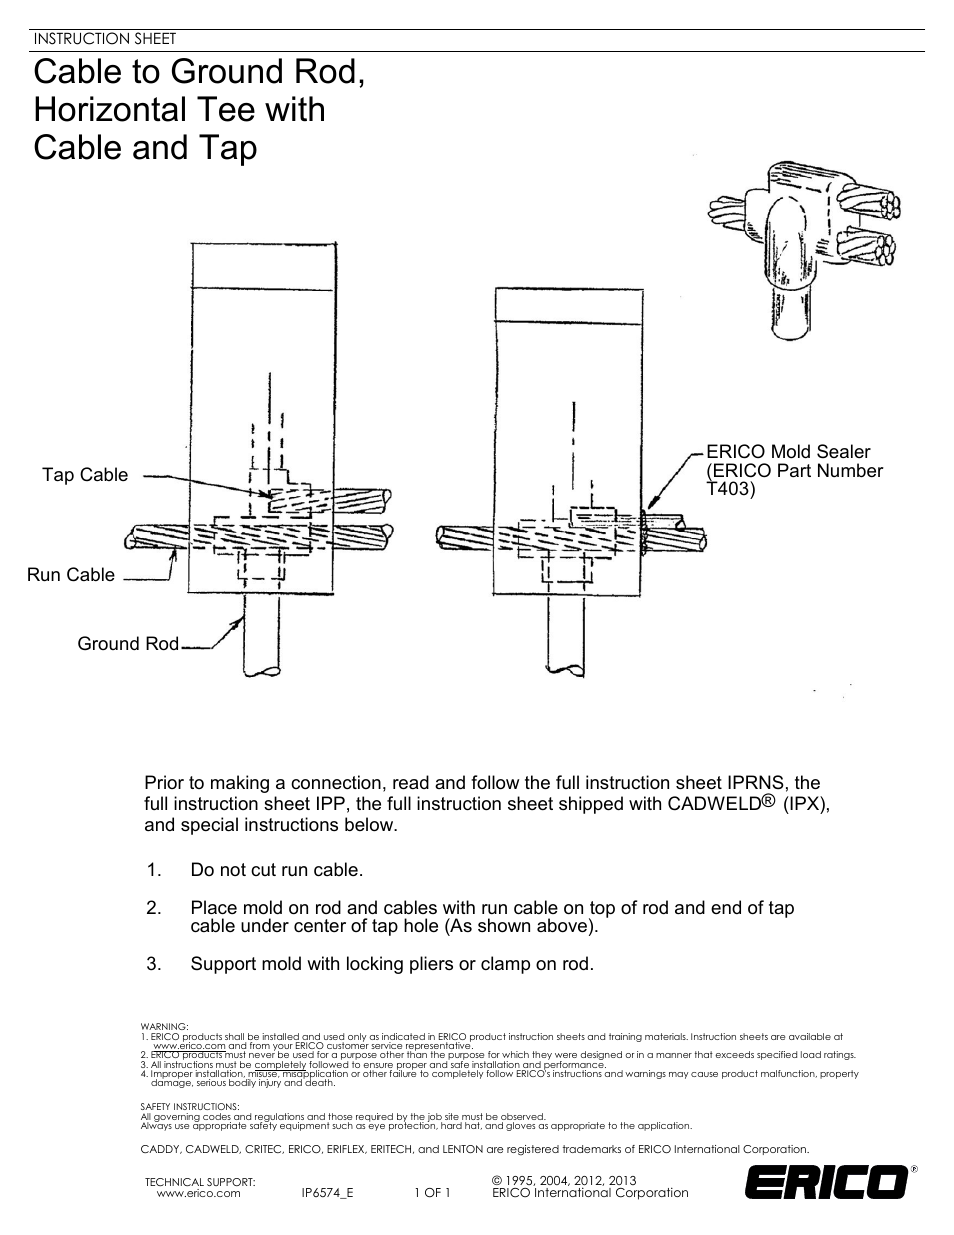 IP6574 Cable to Ground Rod, Horizontal Tee with Cable and Tap